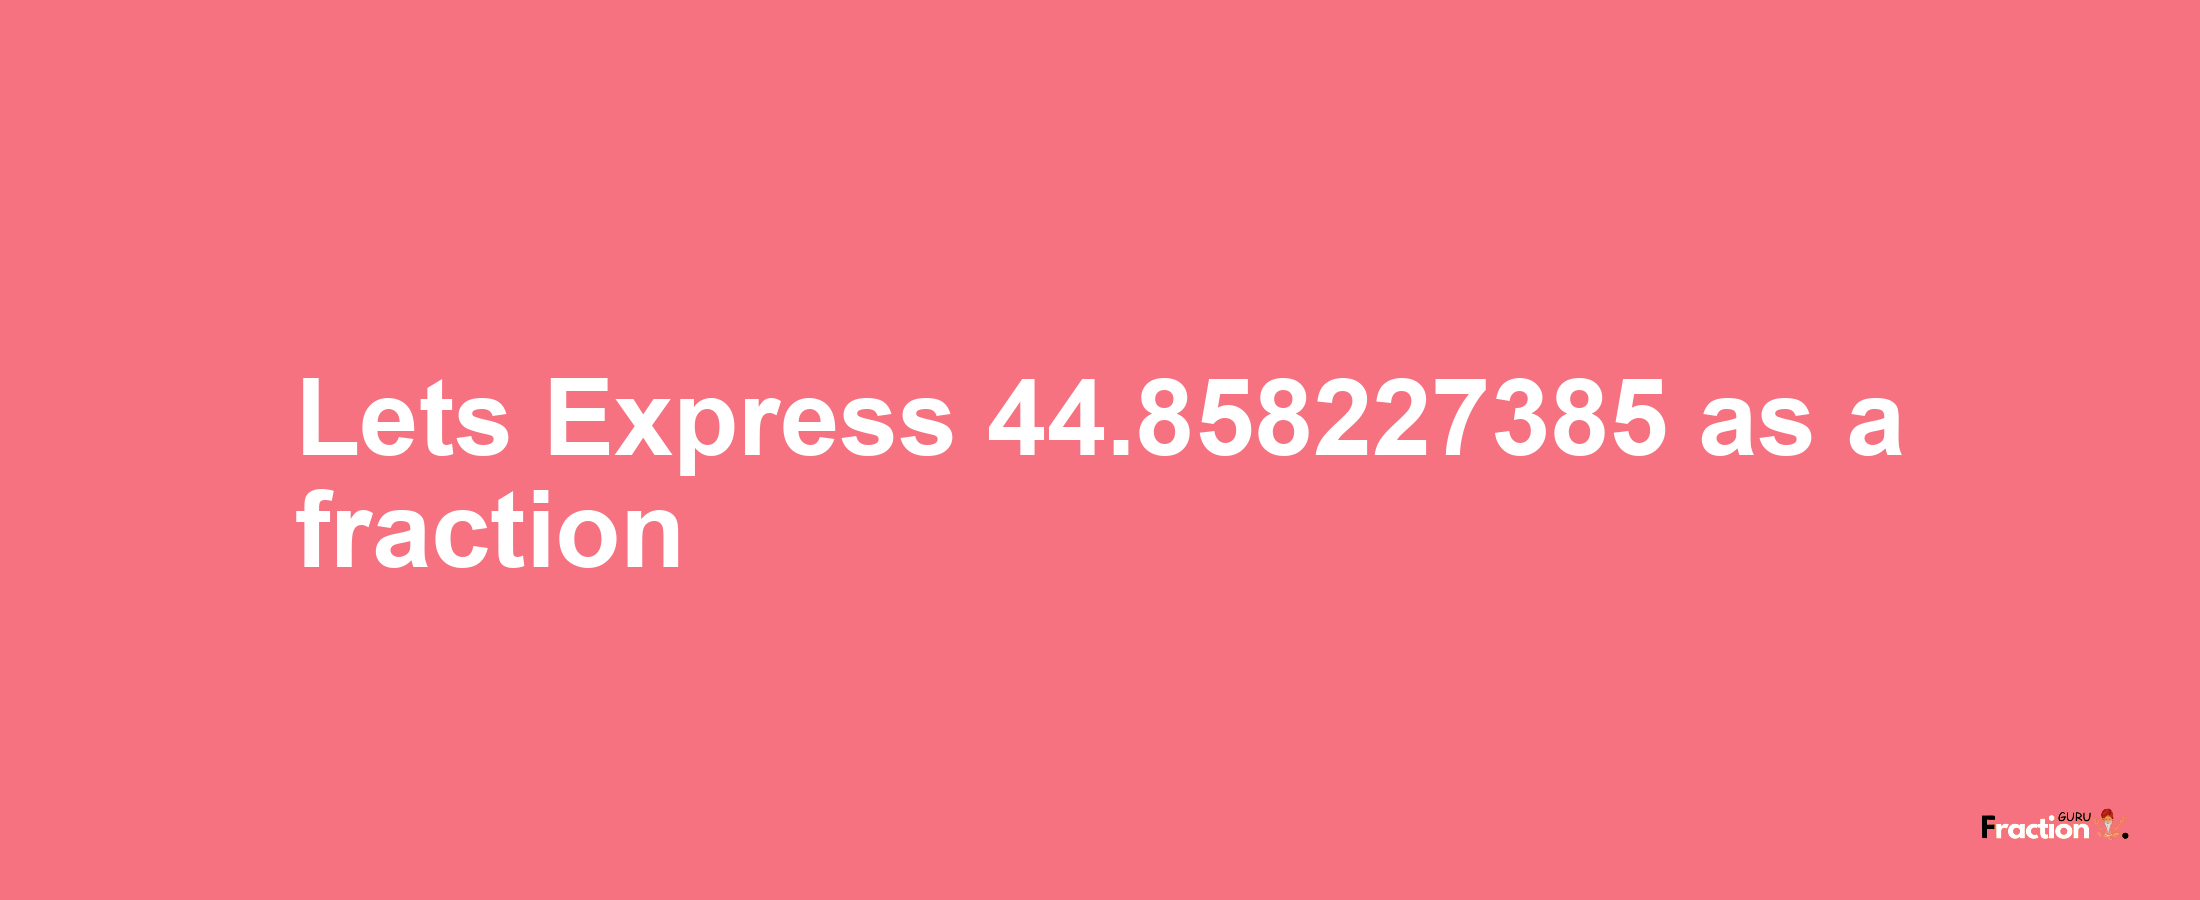 Lets Express 44.858227385 as afraction